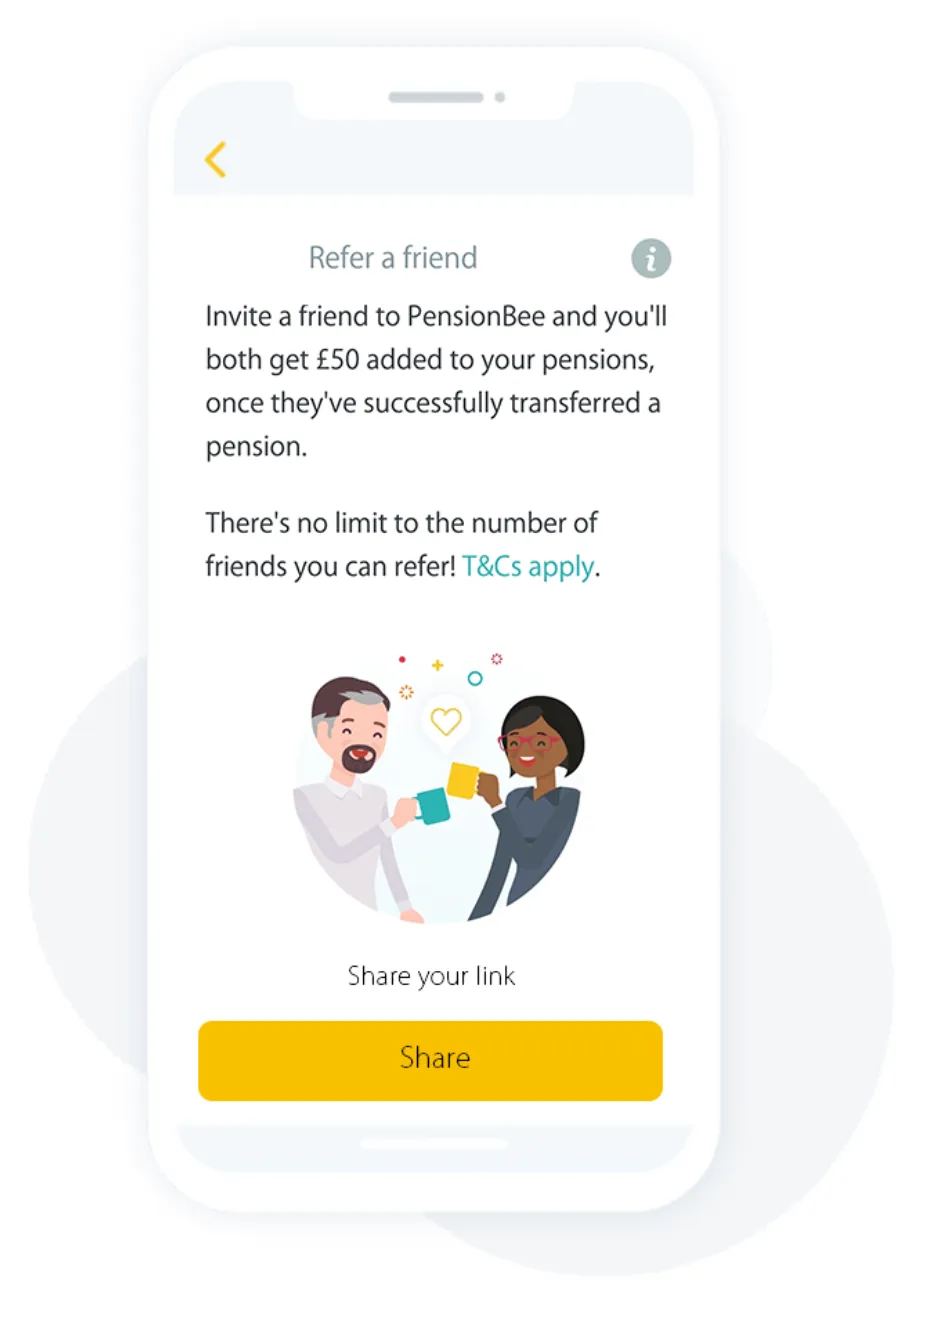 This image is a screenshot from PensionBee, illustrating their "refer a friend" program. The image shows two people, a man with a beard wearing gray clothes and a woman with short hair wearing dark gray clothes and a yellow mug, cheering with their coffee cups. The text explains that by referring a friend, both the referrer and the friend can get £50 added to their pension once the friend successfully transfers their pension. There is no limit to the number of friends that can be referred. The call to action button in yellow says "share". The text "terms and conditions apply" is in blue font and hyperlinked.